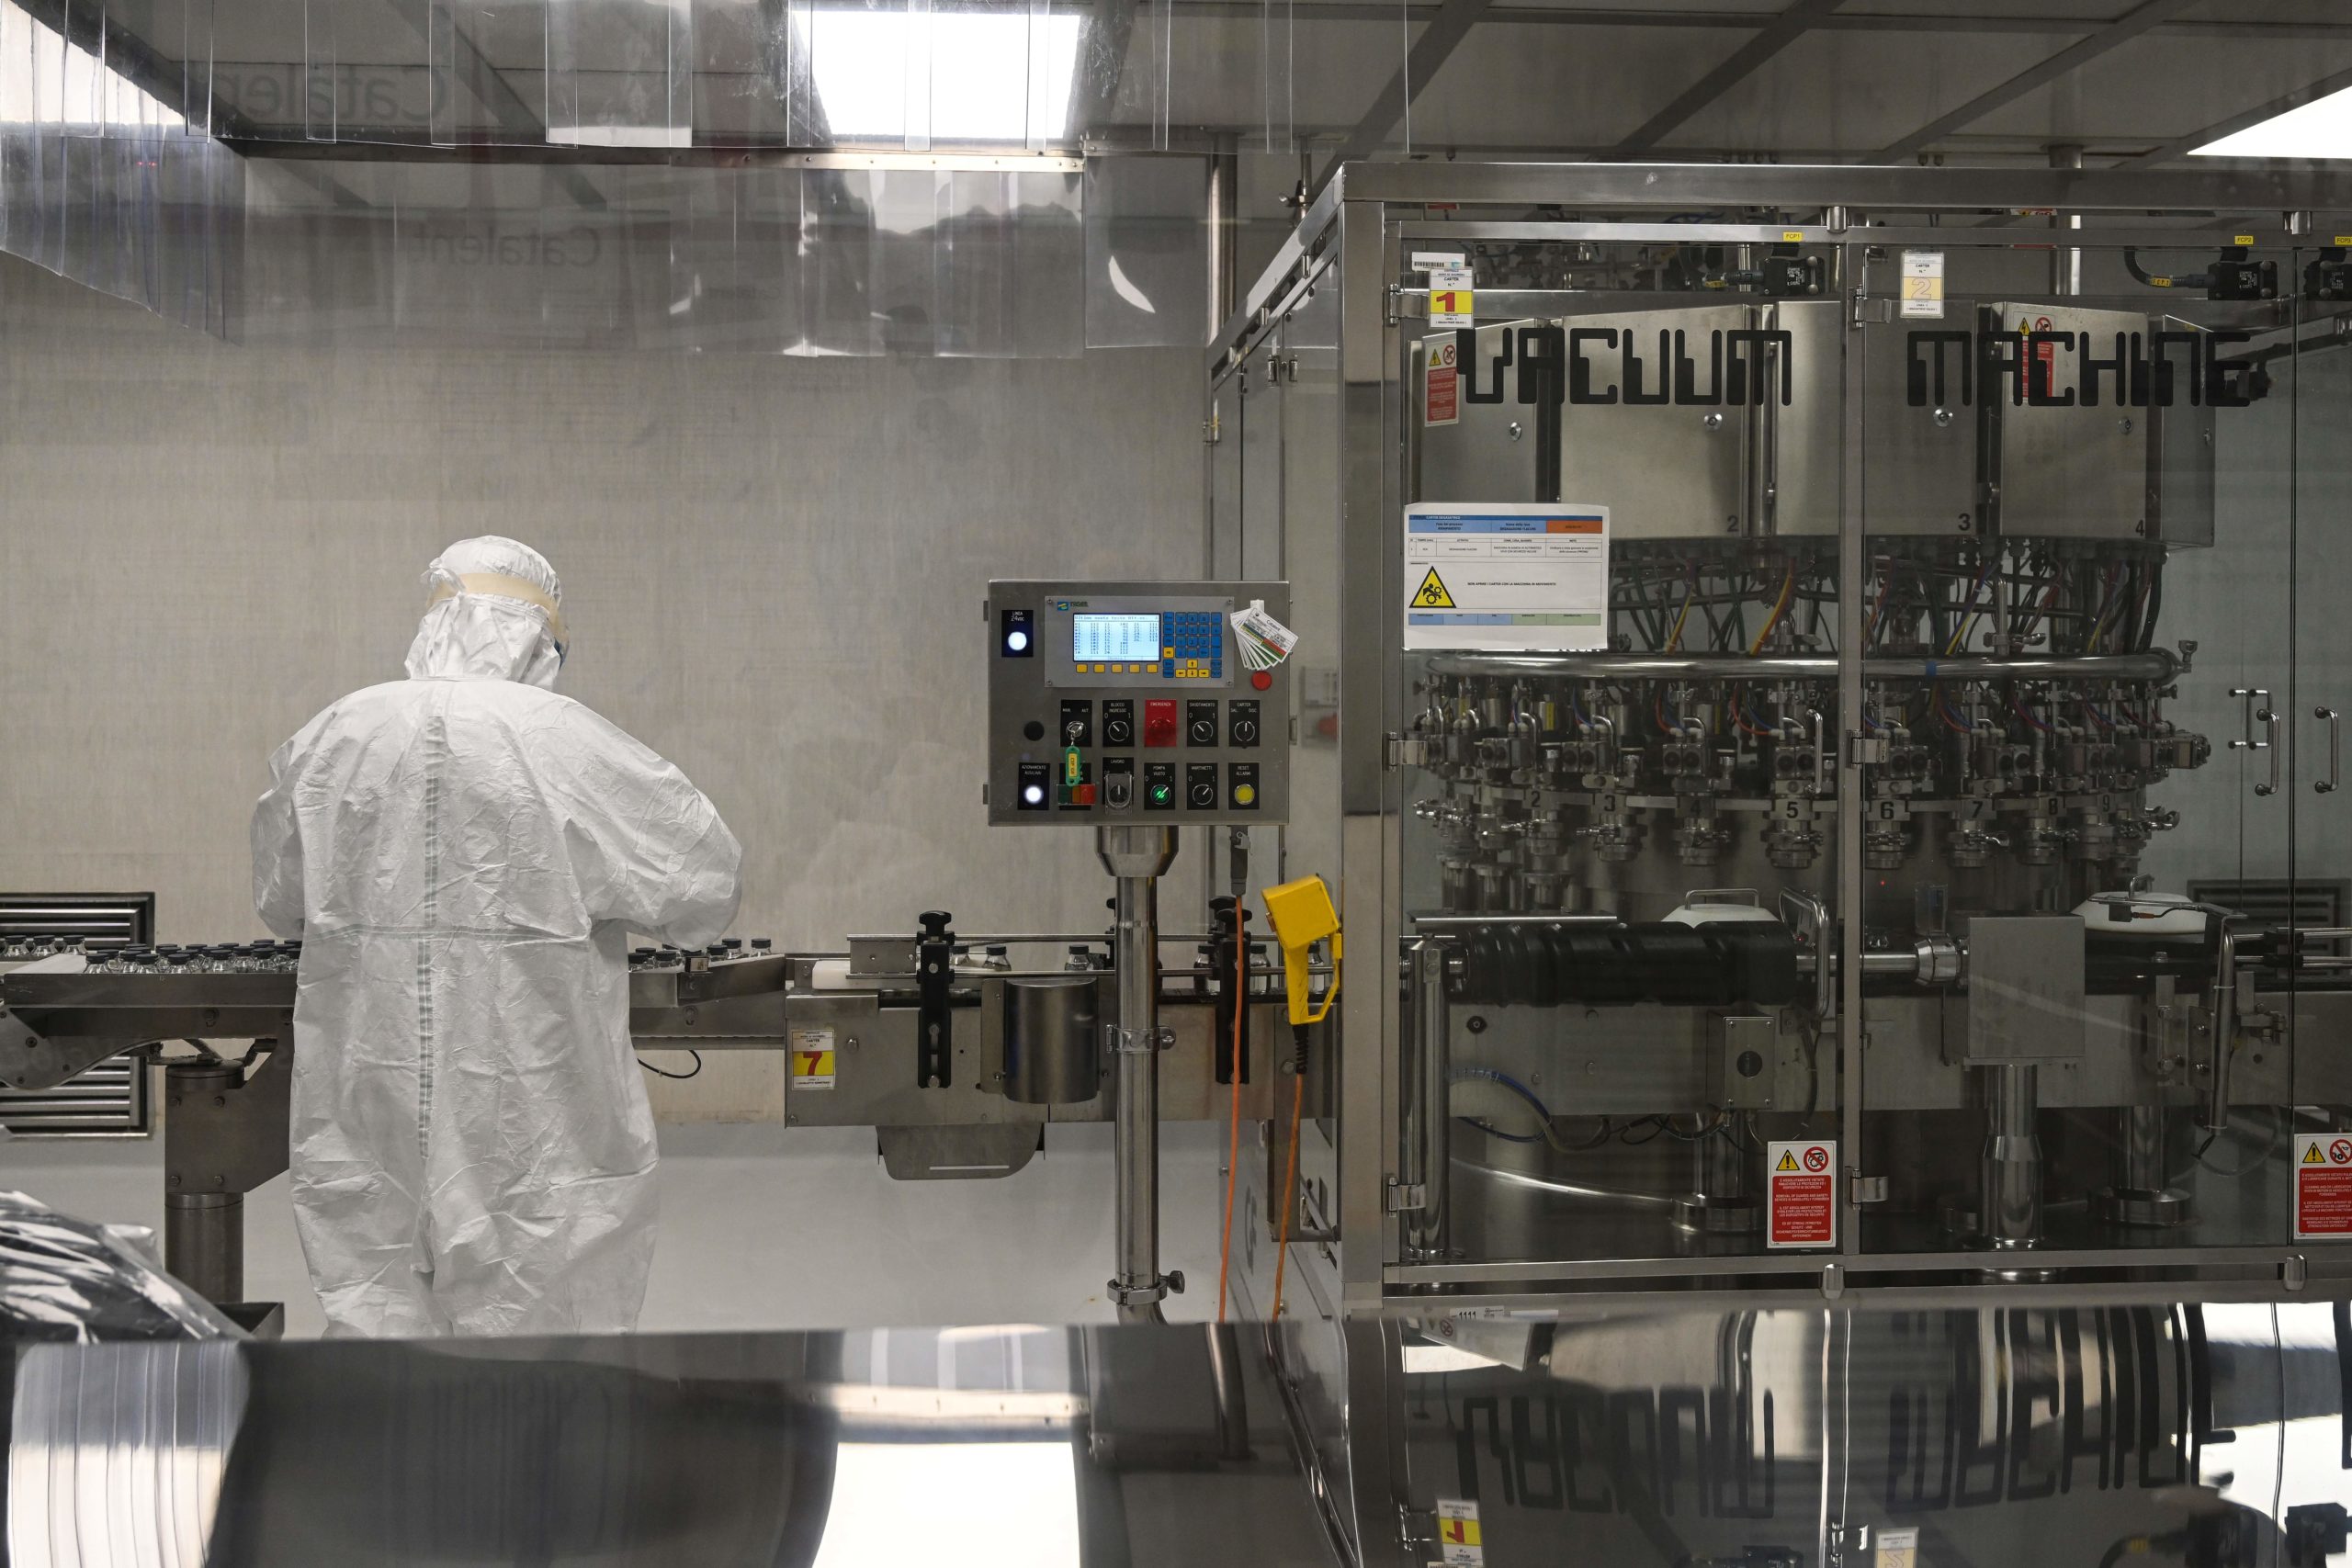 A laboratory technician takes part in filling and packaging tests for the large-scale production and supply of the University of Oxfords COVID-19 vaccine candidate, AZD1222, conducted on a high-performance aseptic vial filling line on September 11, 2020 at the Italian biologics manufacturing facility of multinational corporation Catalent in Anagni, southeast of Rome, during the COVID-19 infection, caused by the novel coronavirus. - Catalent Biologics manufacturing facility in Anagni, Italy will serve as the launch facility for the large-scale production and supply of the University of Oxfords Covid-19 vaccine candidate, AZD1222, providing large-scale vial filling and packaging to British-Swedish multinational pharmaceutical and biopharmaceutical company AstraZeneca. (Photo by Vincenzo PINTO / AFP) (Photo by VINCENZO PINTO/AFP via Getty Images)